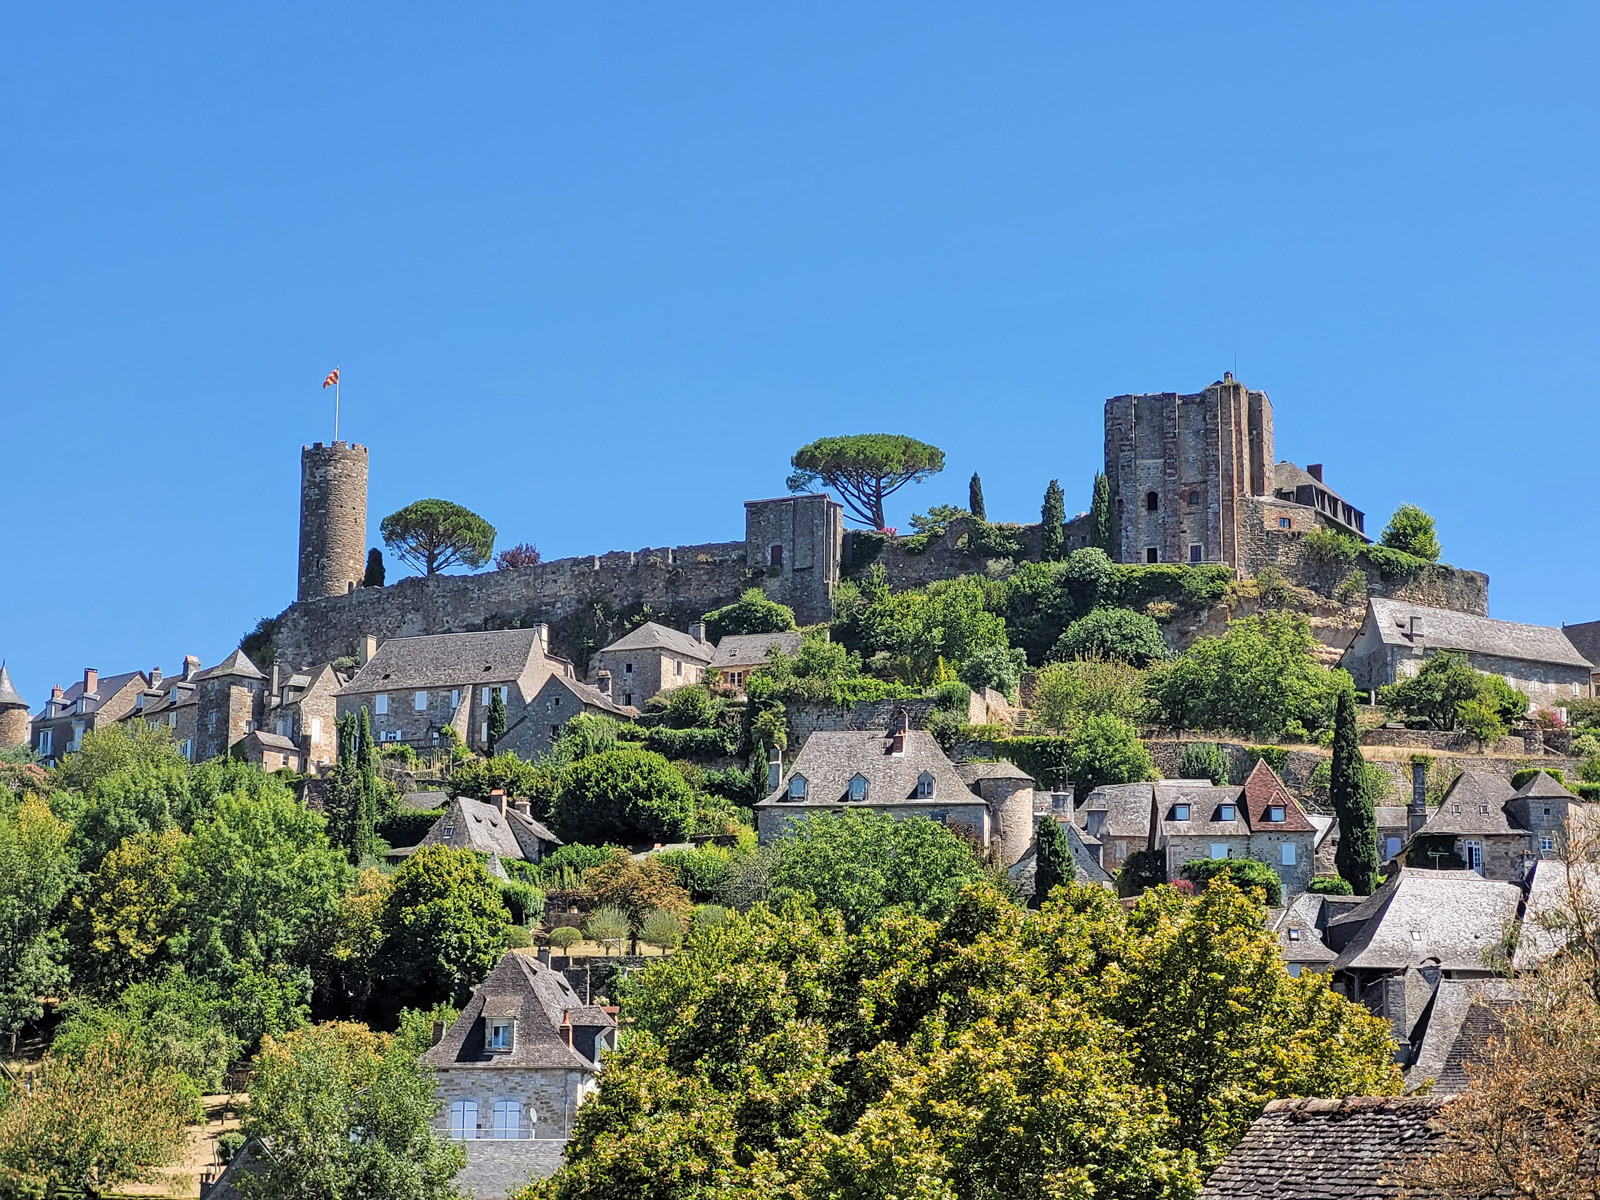 Turenne and its castle